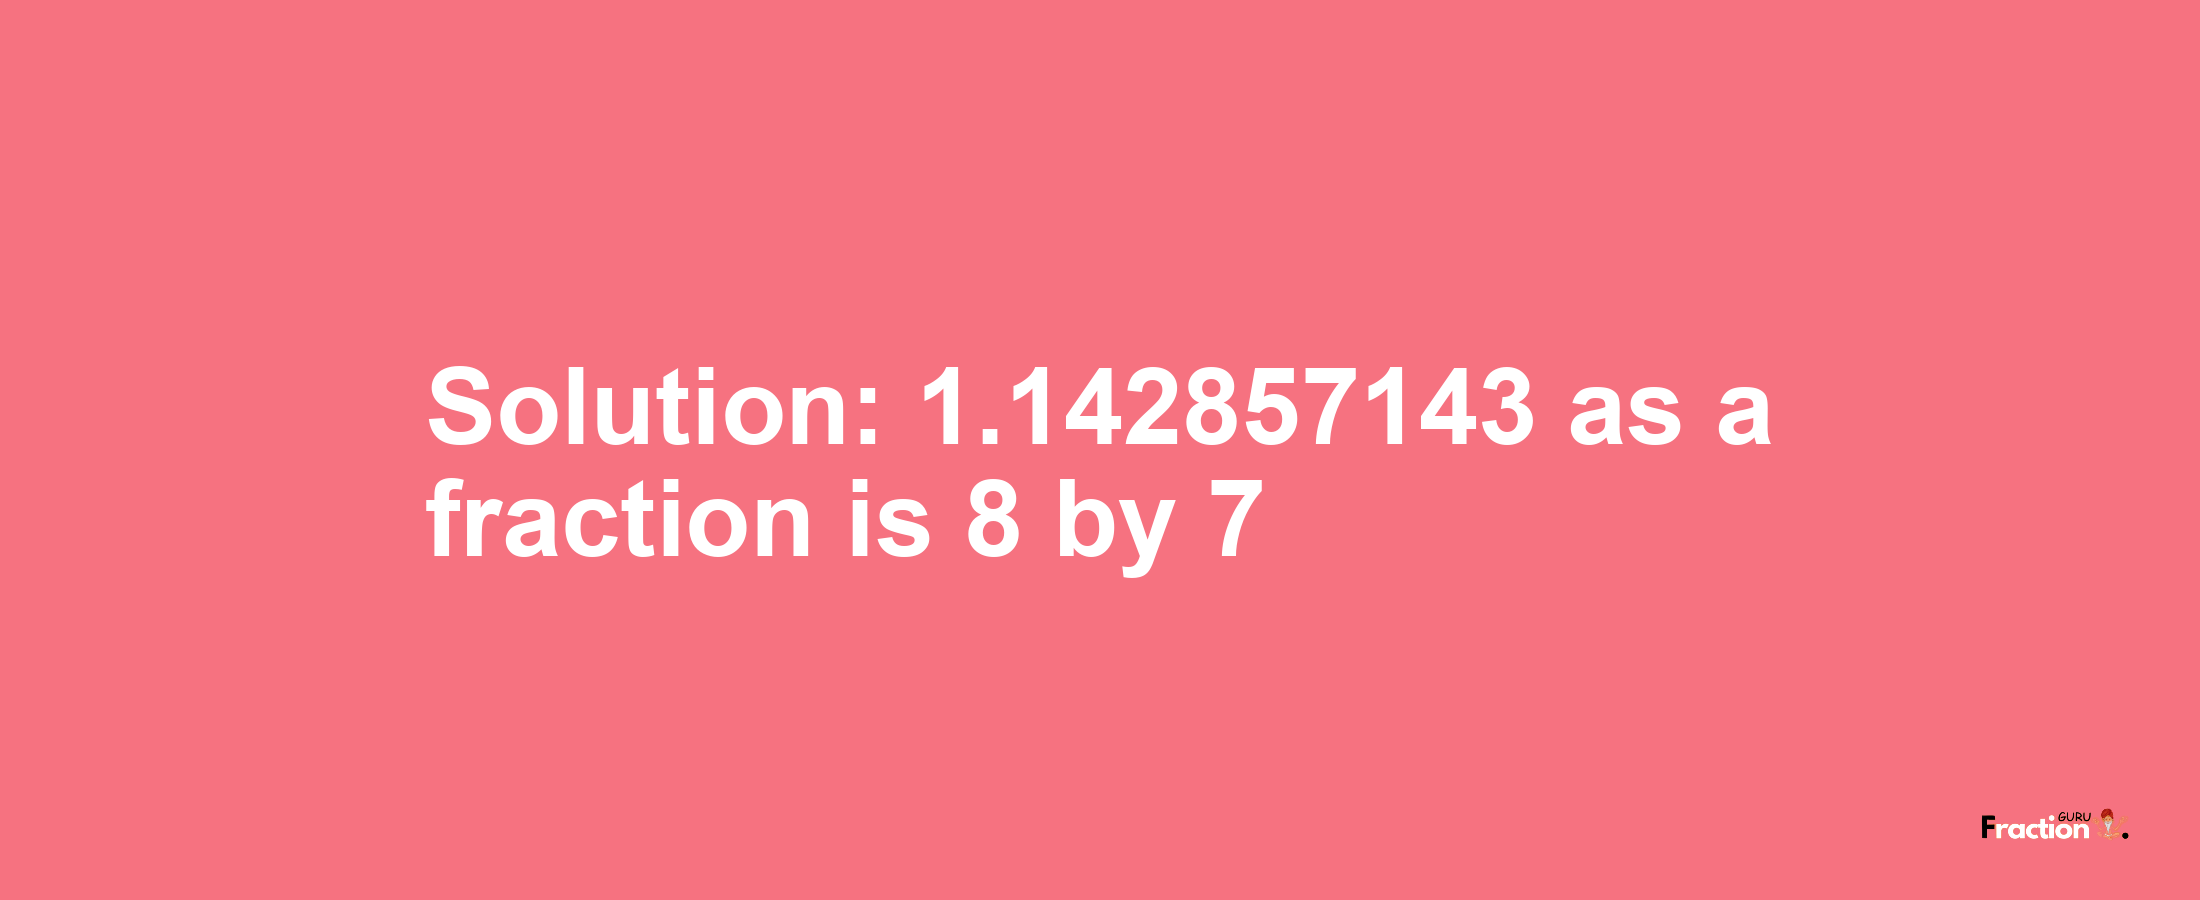 Solution:1.142857143 as a fraction is 8/7